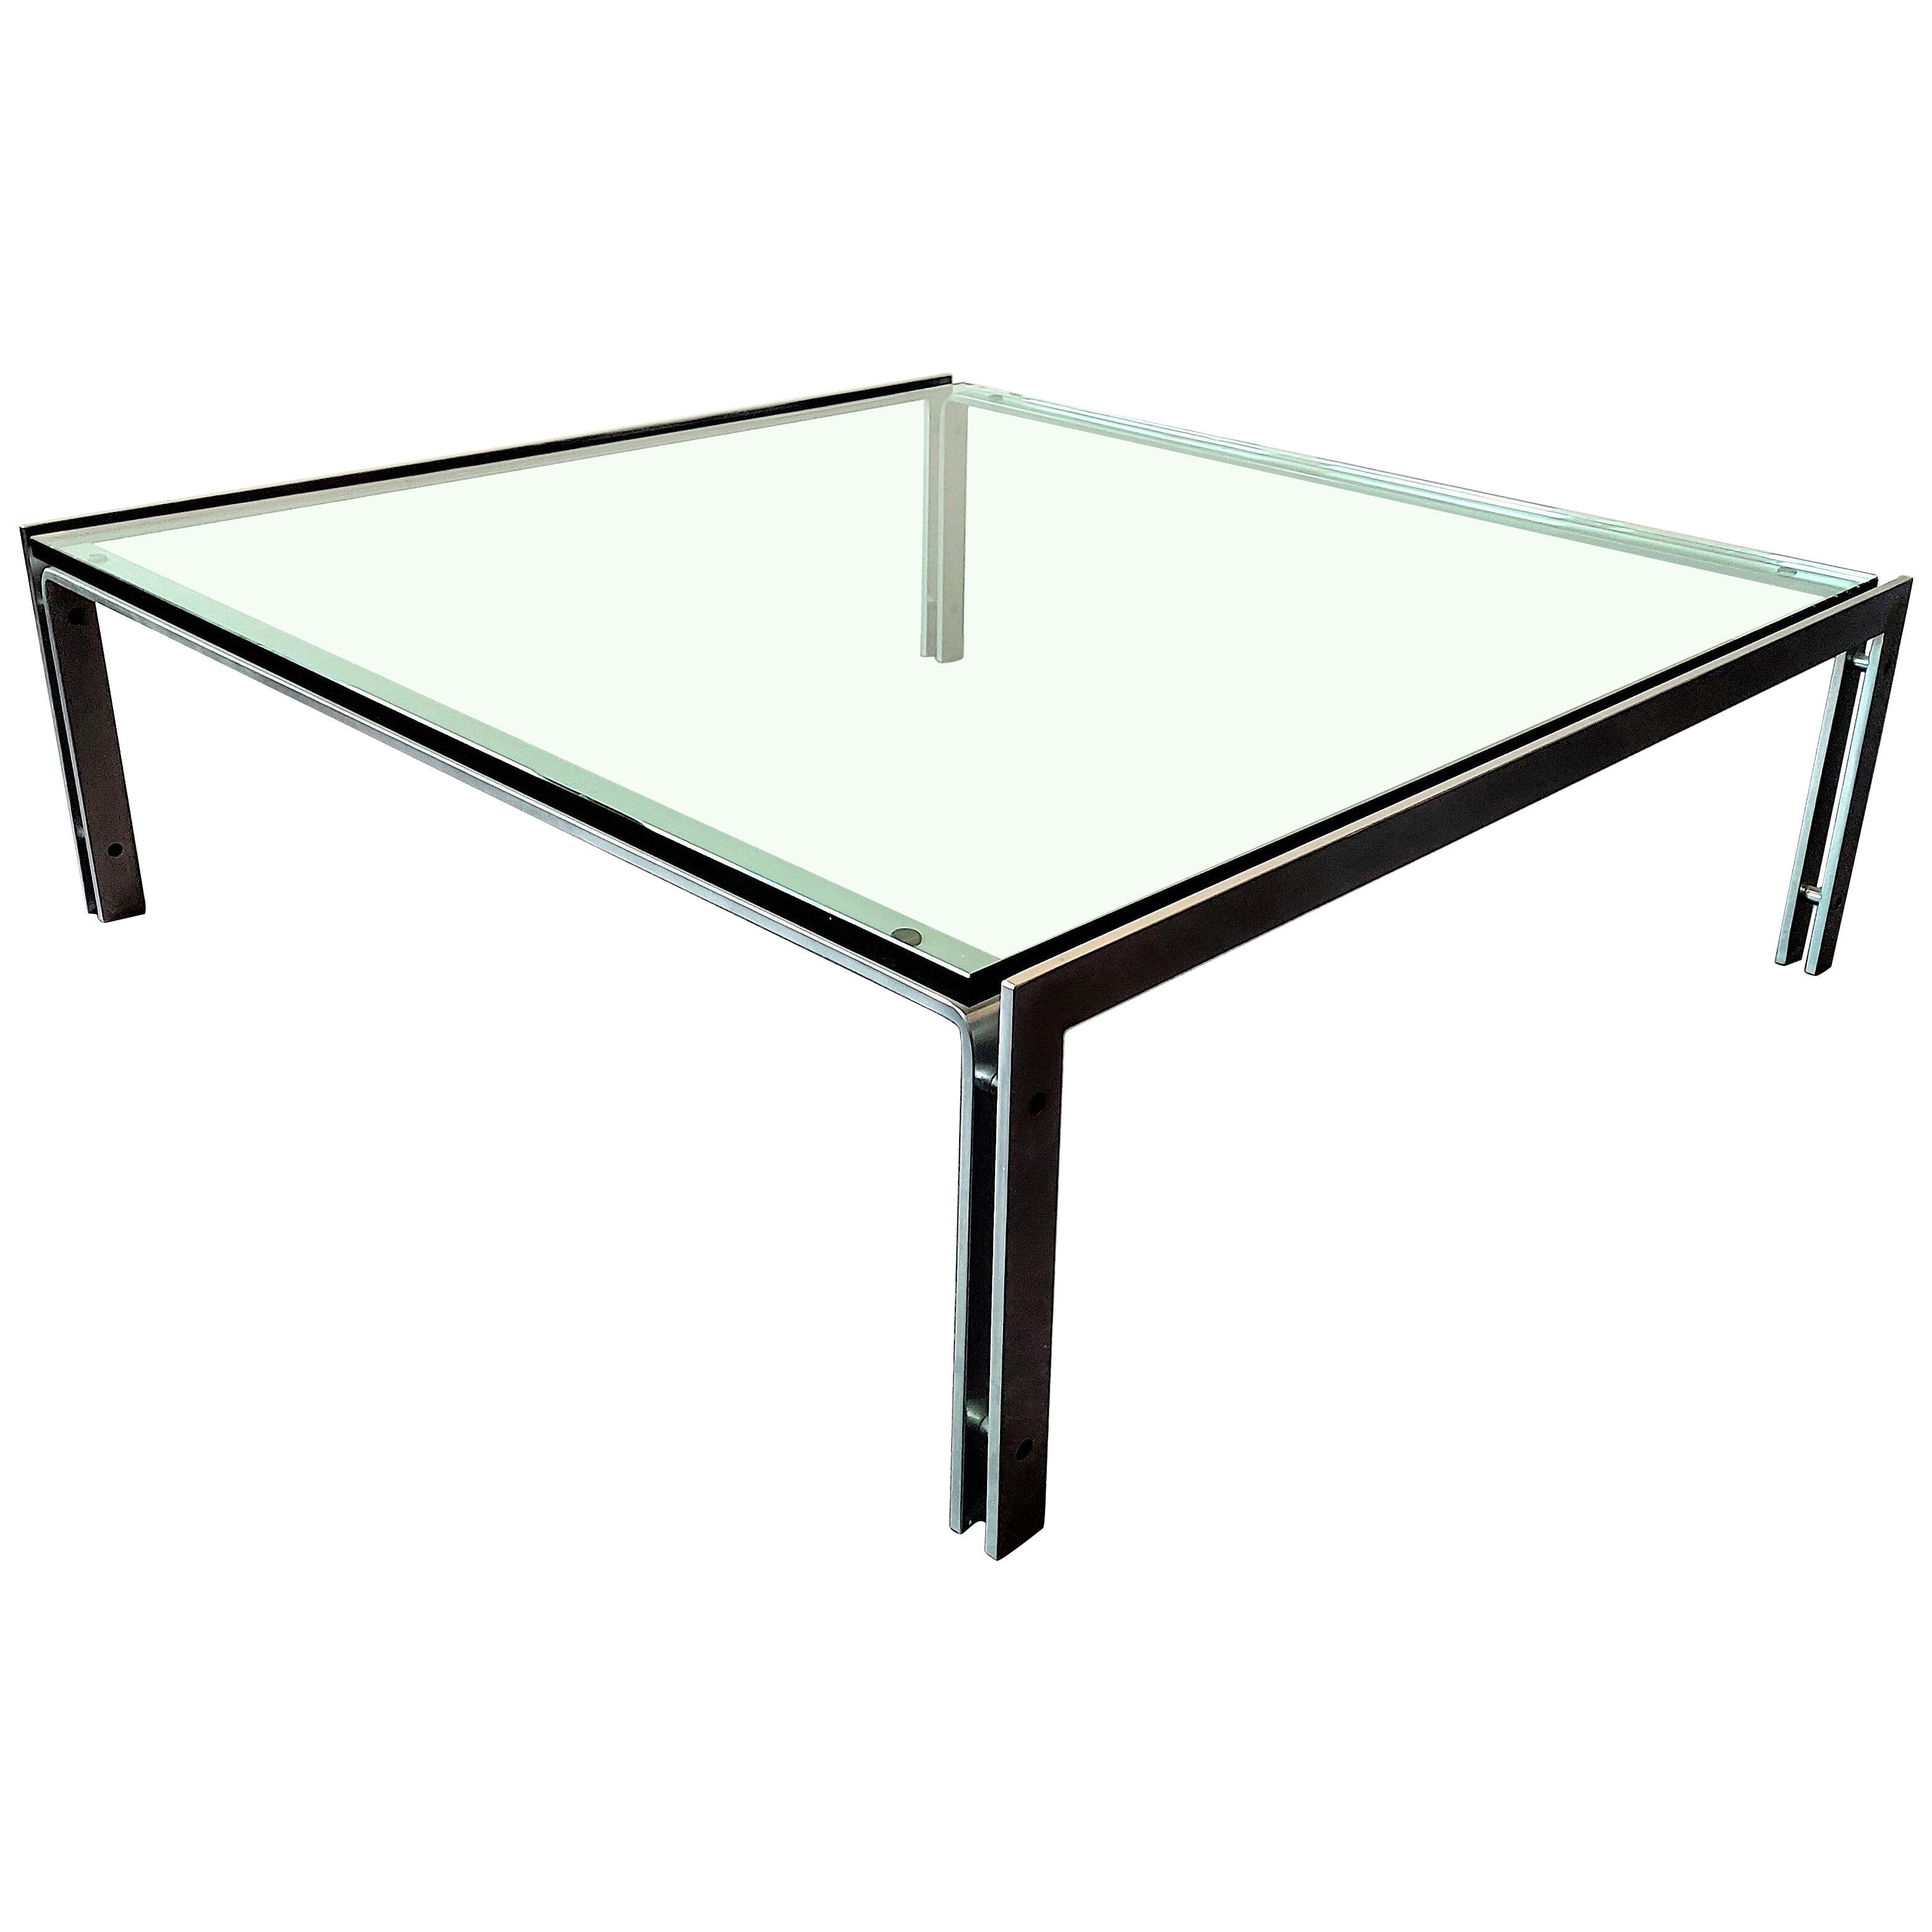 Large steel and glass M1 coffee table by Hank Kwint for Metaform, 1980's